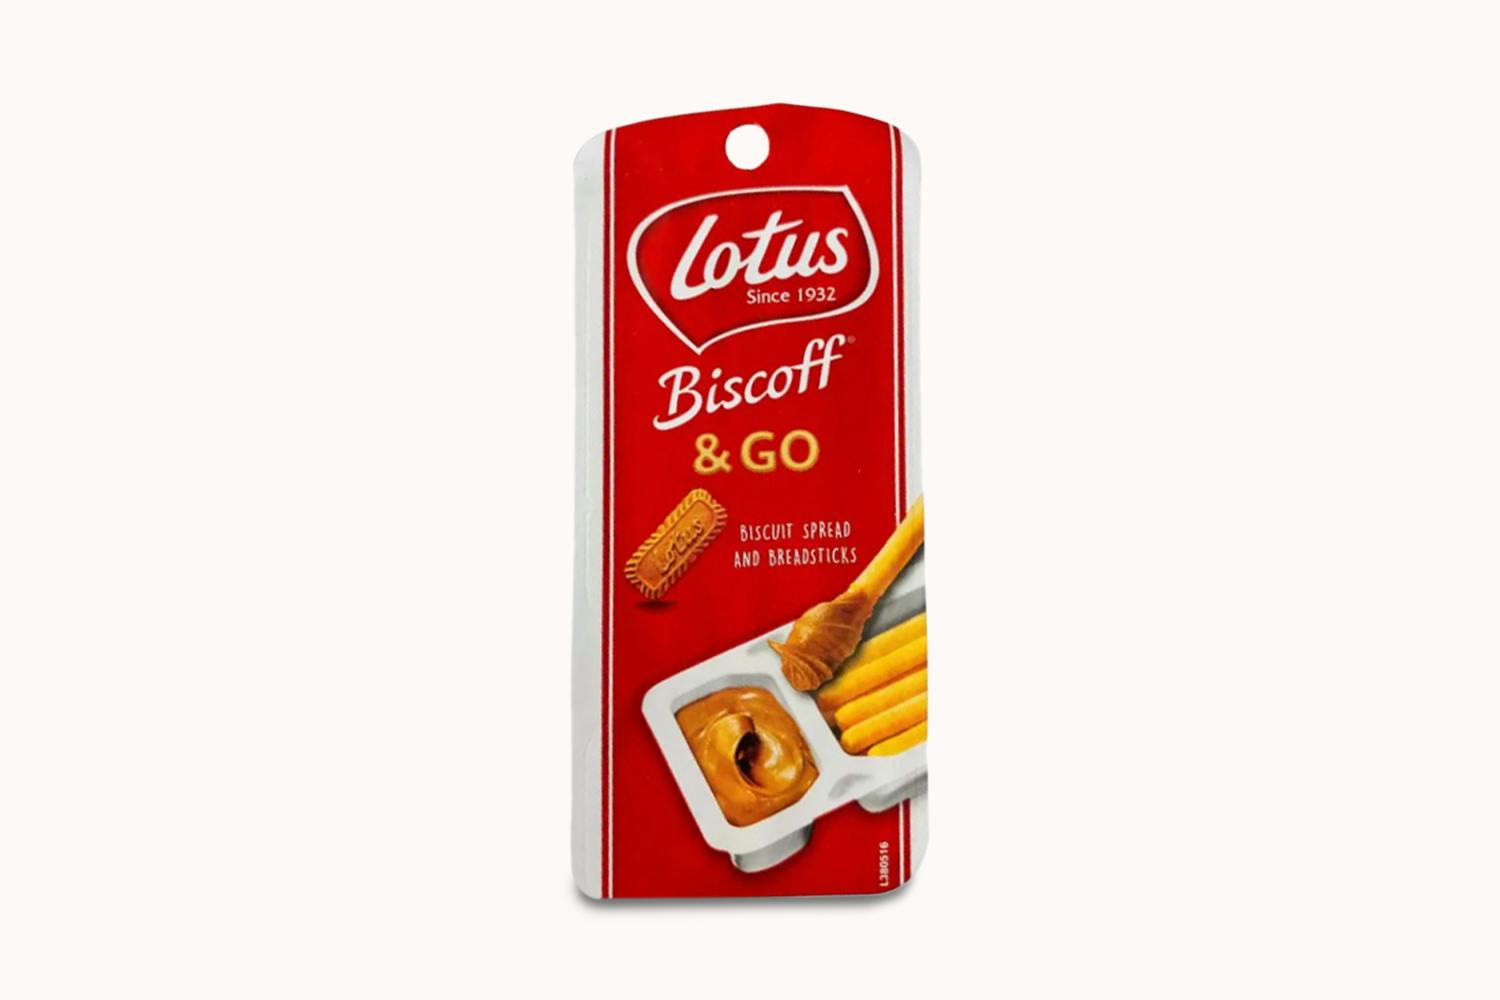 Lotus Biscoff & Go Biscuit Spread And Breadsticks